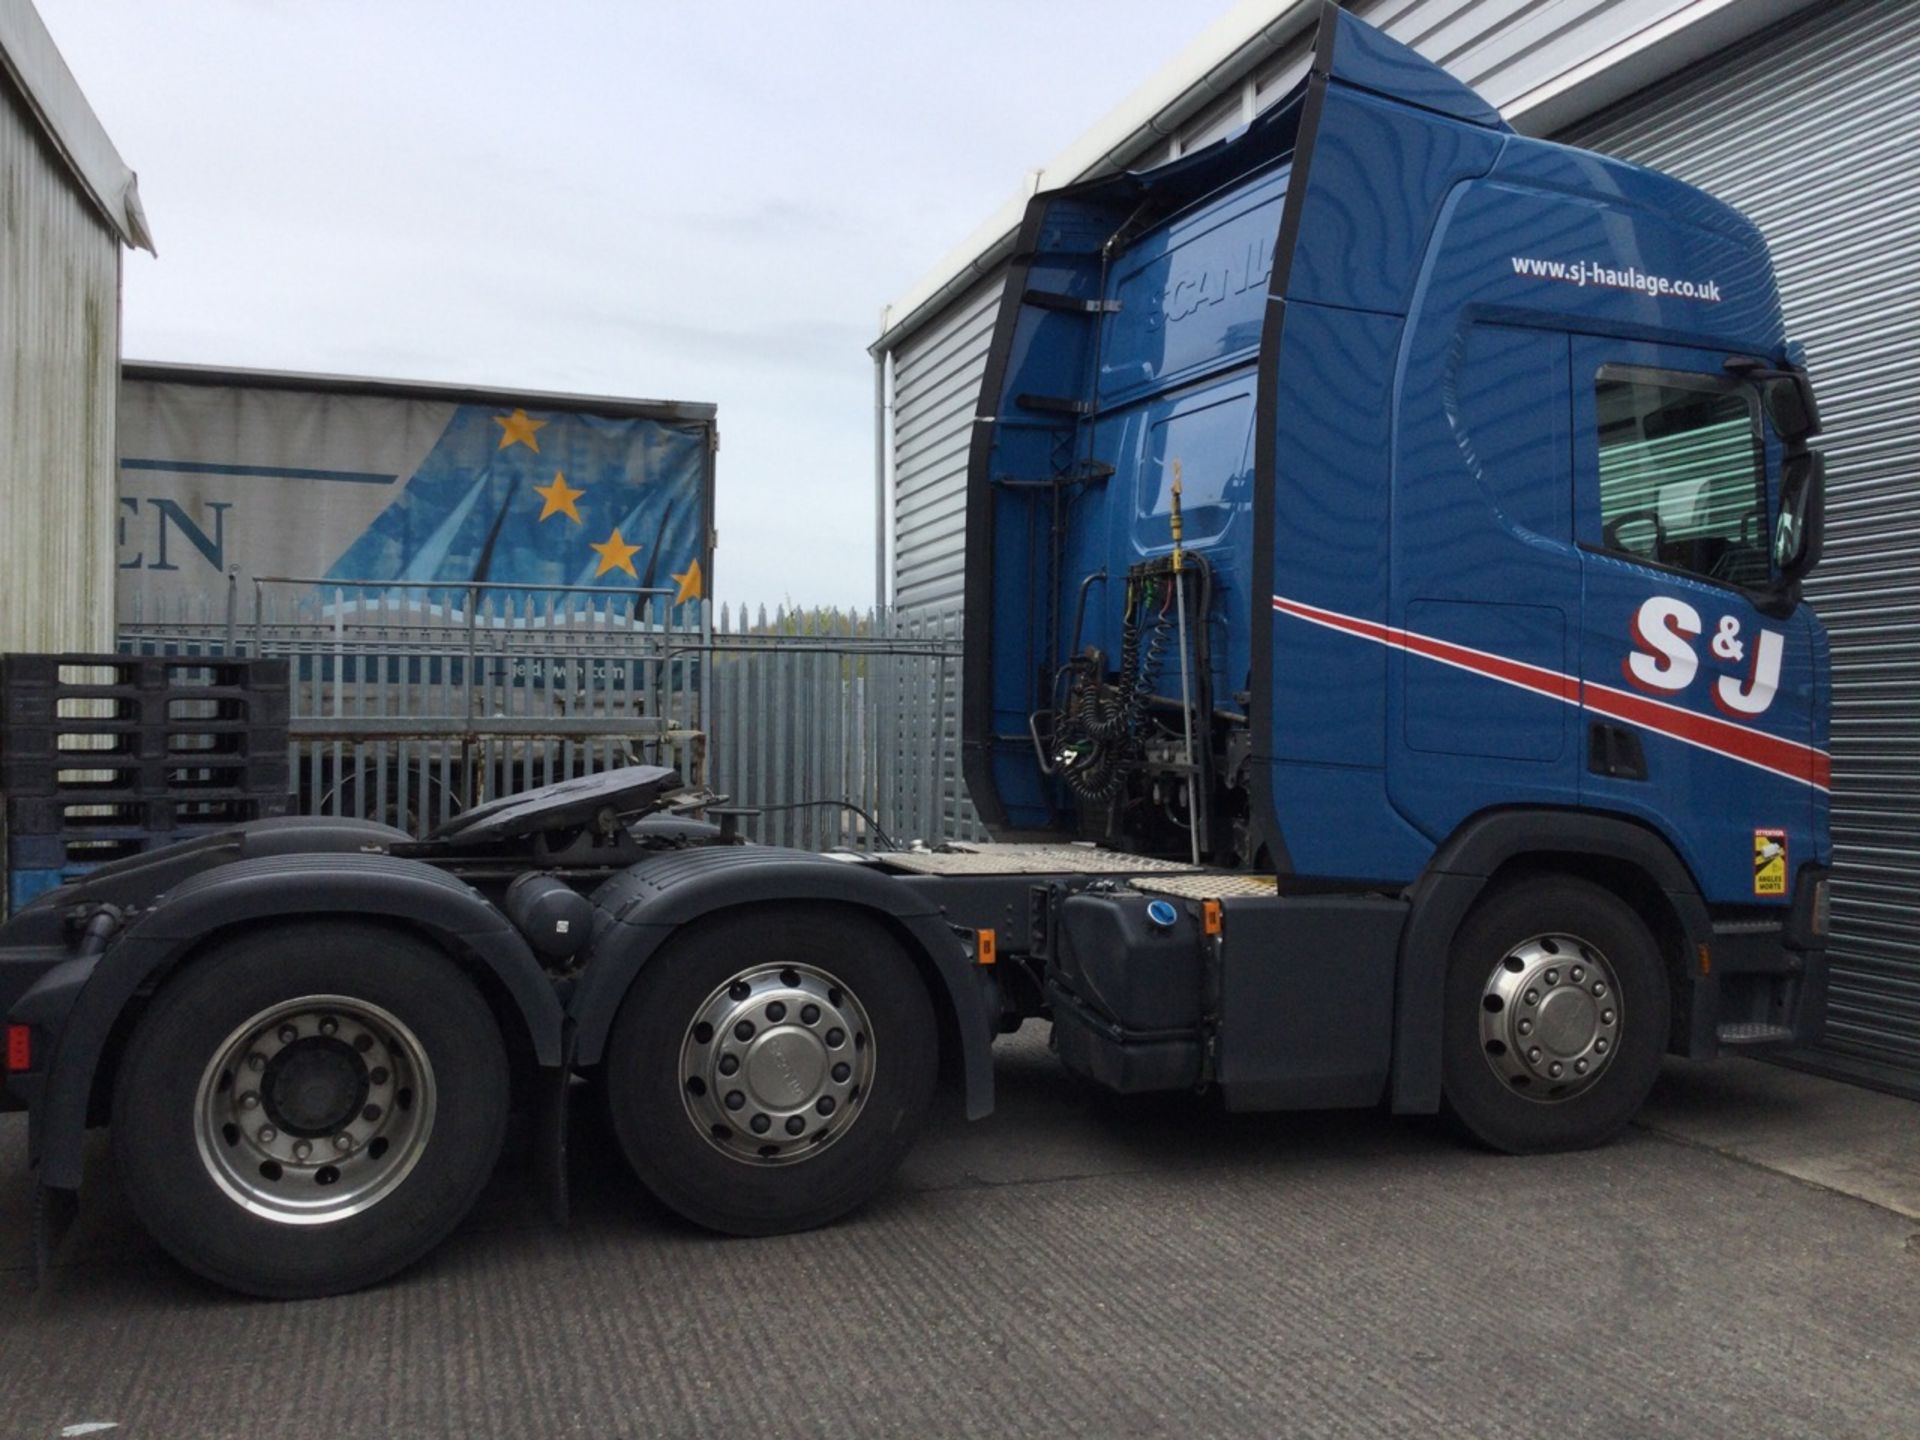 SCANIA R450A 6X2 4NA Highline Tractor Unit, mid-lift axle, sleeper cab, Mot Expired Registration num